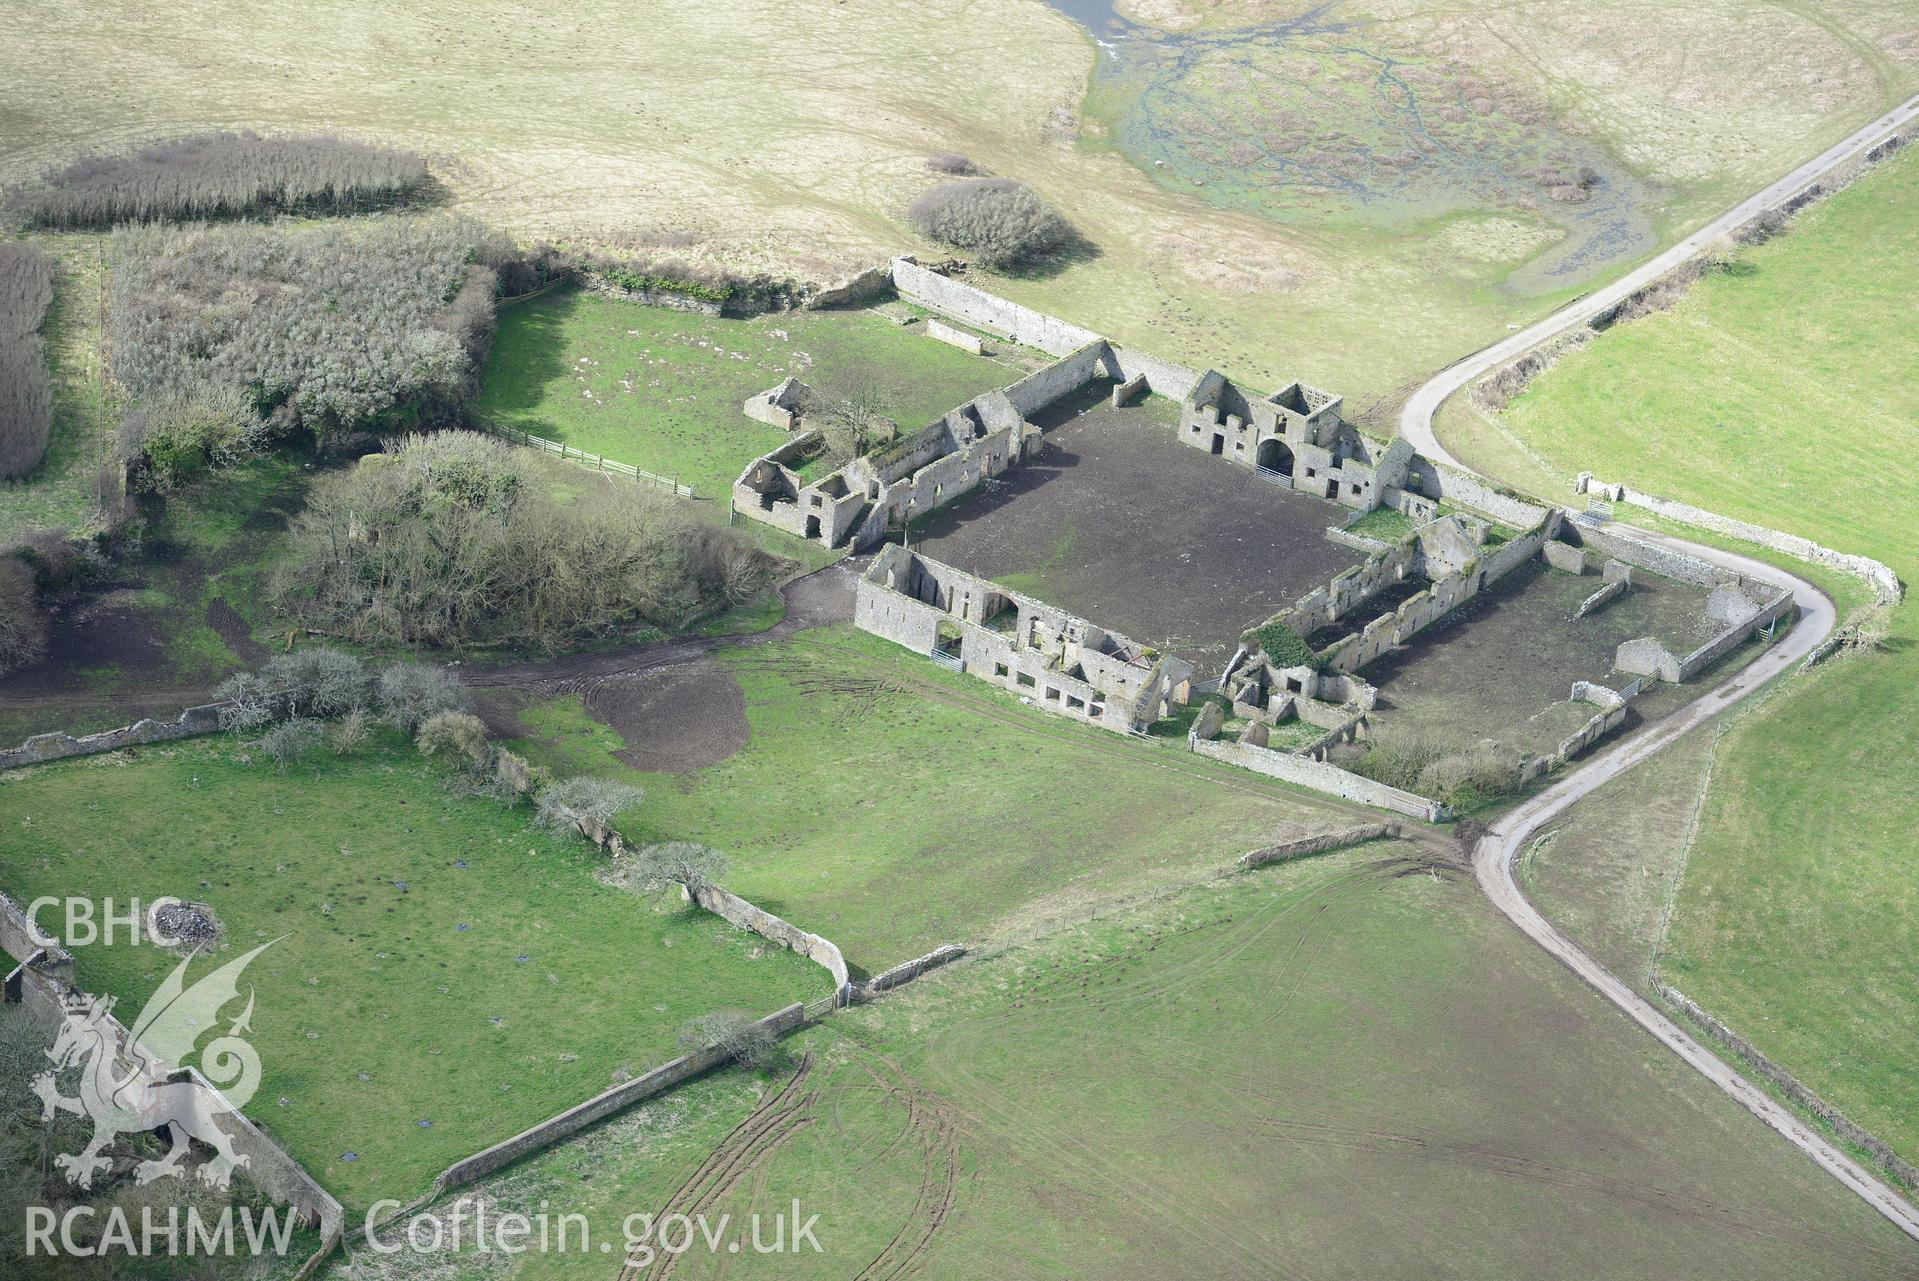 Brownslade Model Farm. Baseline aerial reconnaissance survey for the CHERISH Project. ? Crown: CHERISH PROJECT 2018. Produced with EU funds through the Ireland Wales Co-operation Programme 2014-2020. All material made freely available through the Open Government Licence.